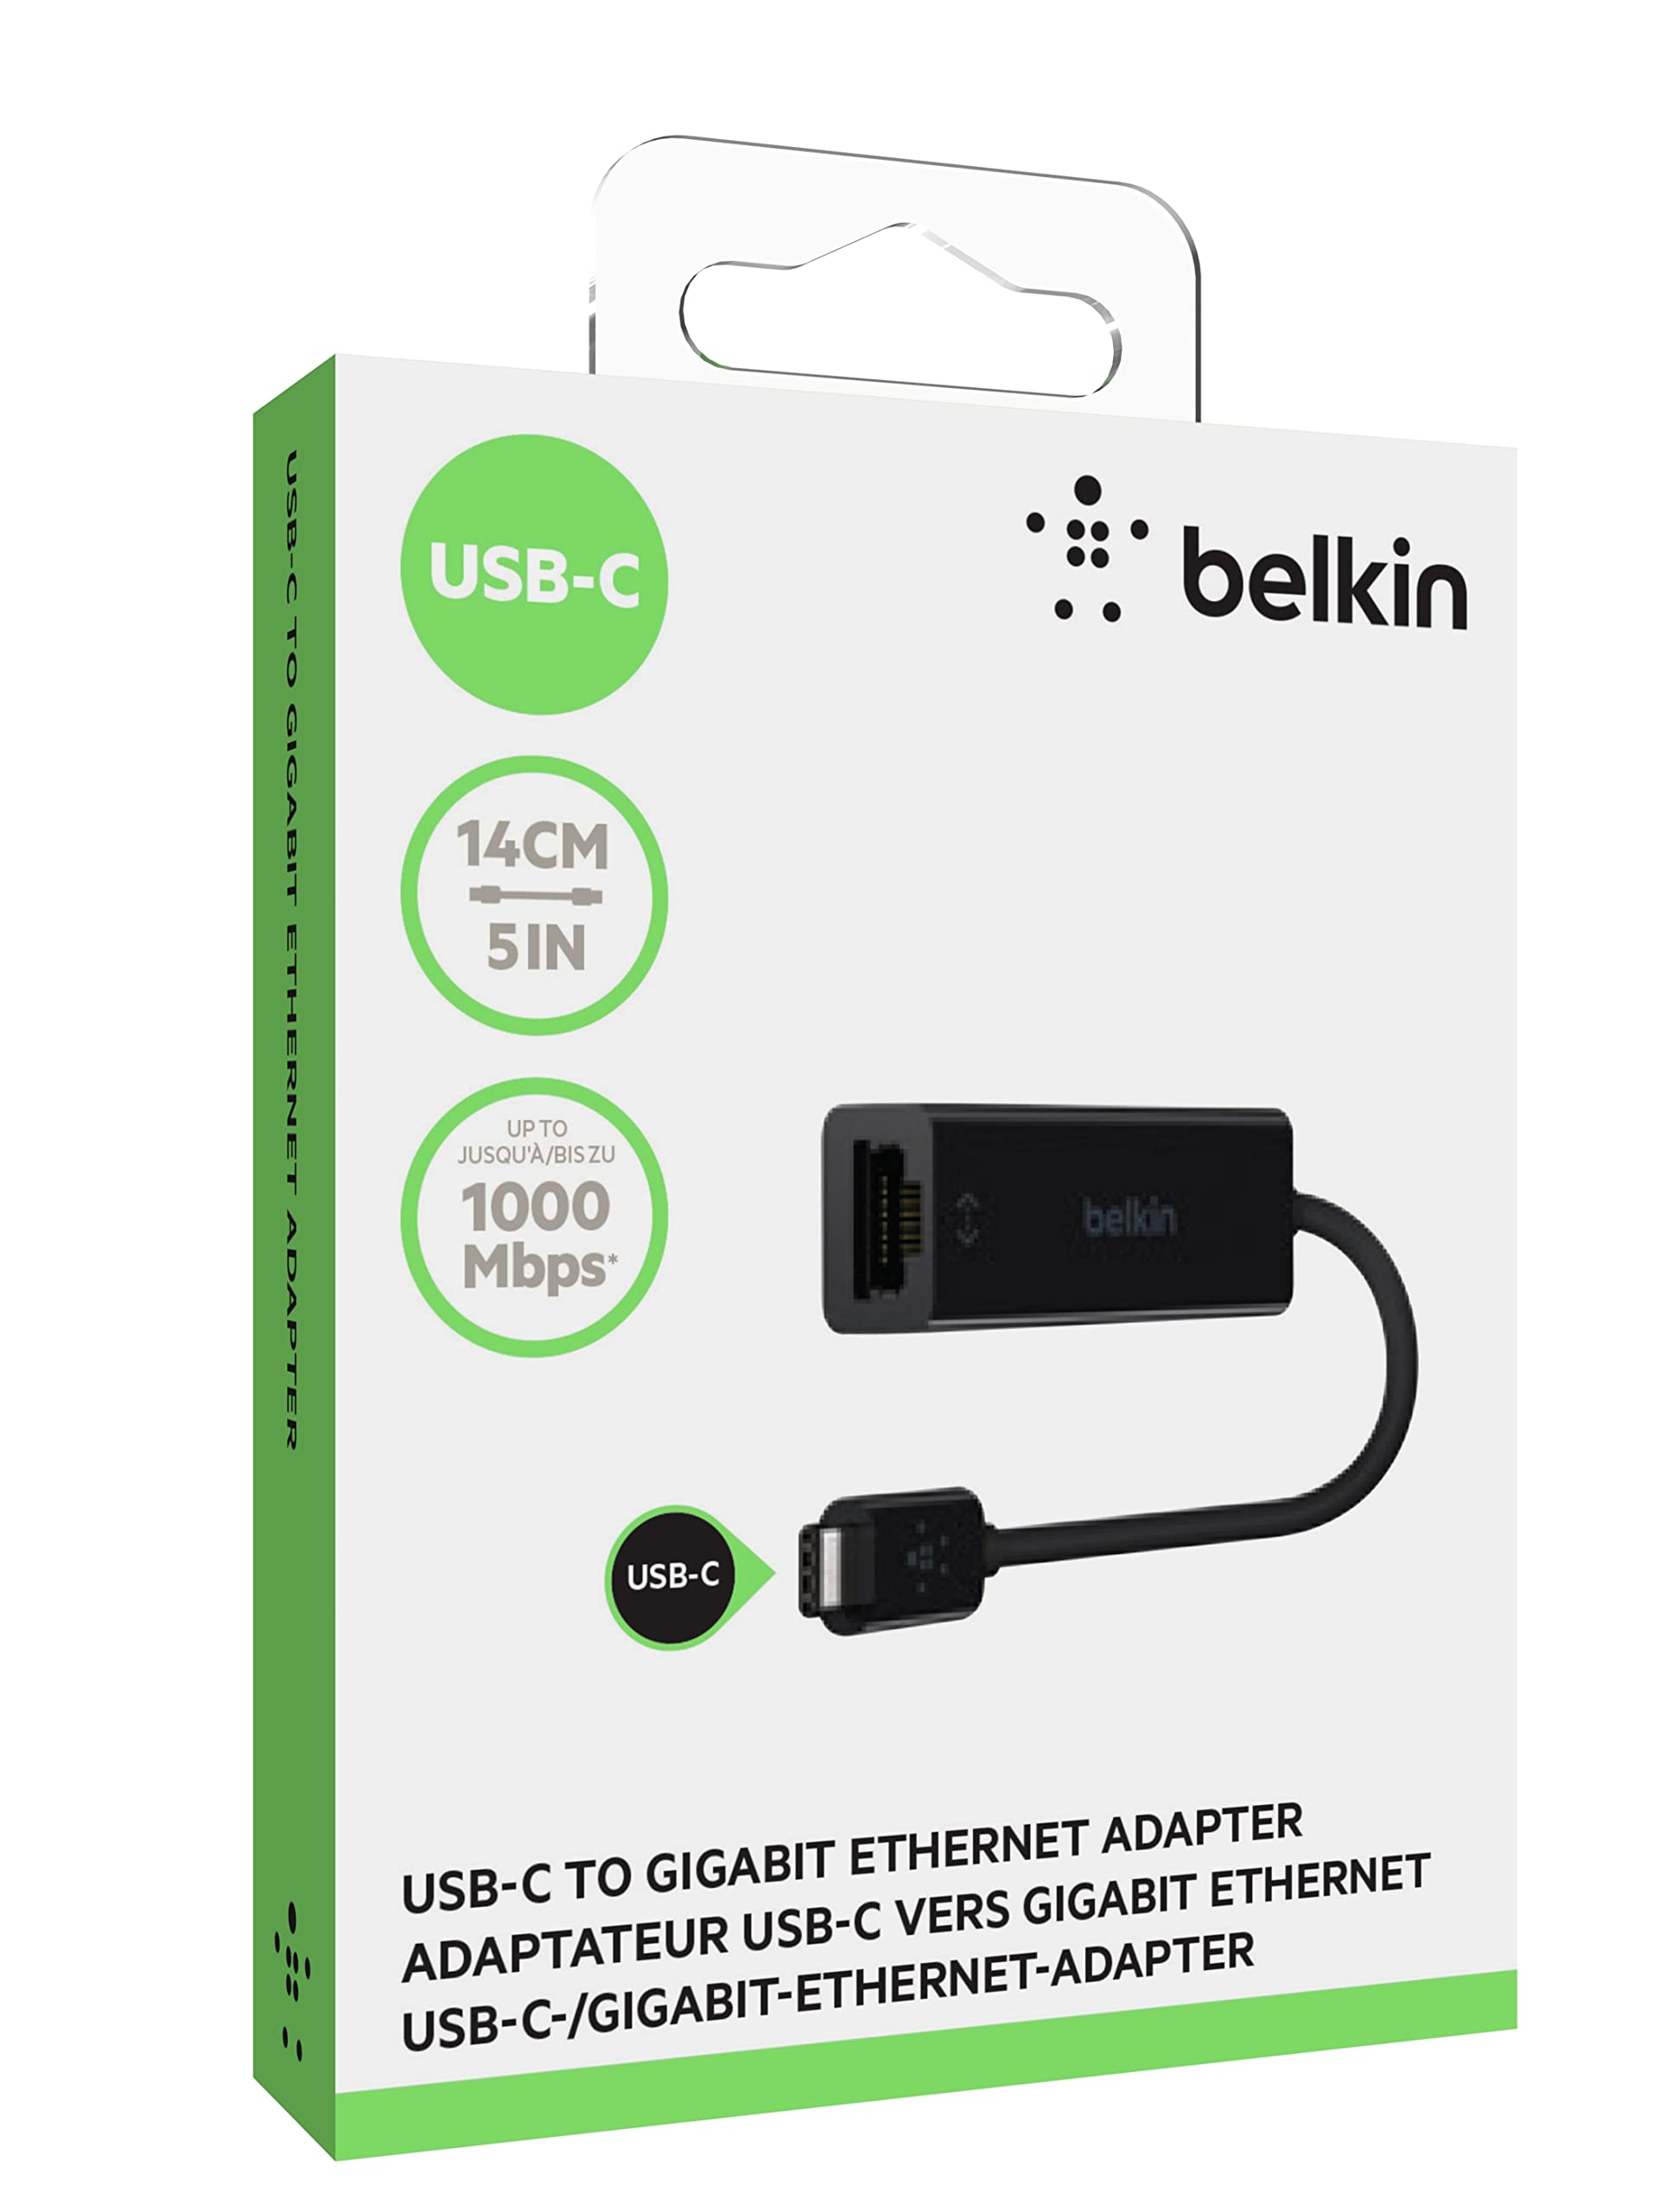 Belkin USB C To Ethernet Adapter - Gigabit Ethernet Port Compatible with USB C Devices - USB C to Ethernet Cable For MacBook Pro & Dell XPS 13” Laptops - Ethernet USB C Hub - Ethernet USB C Adapter